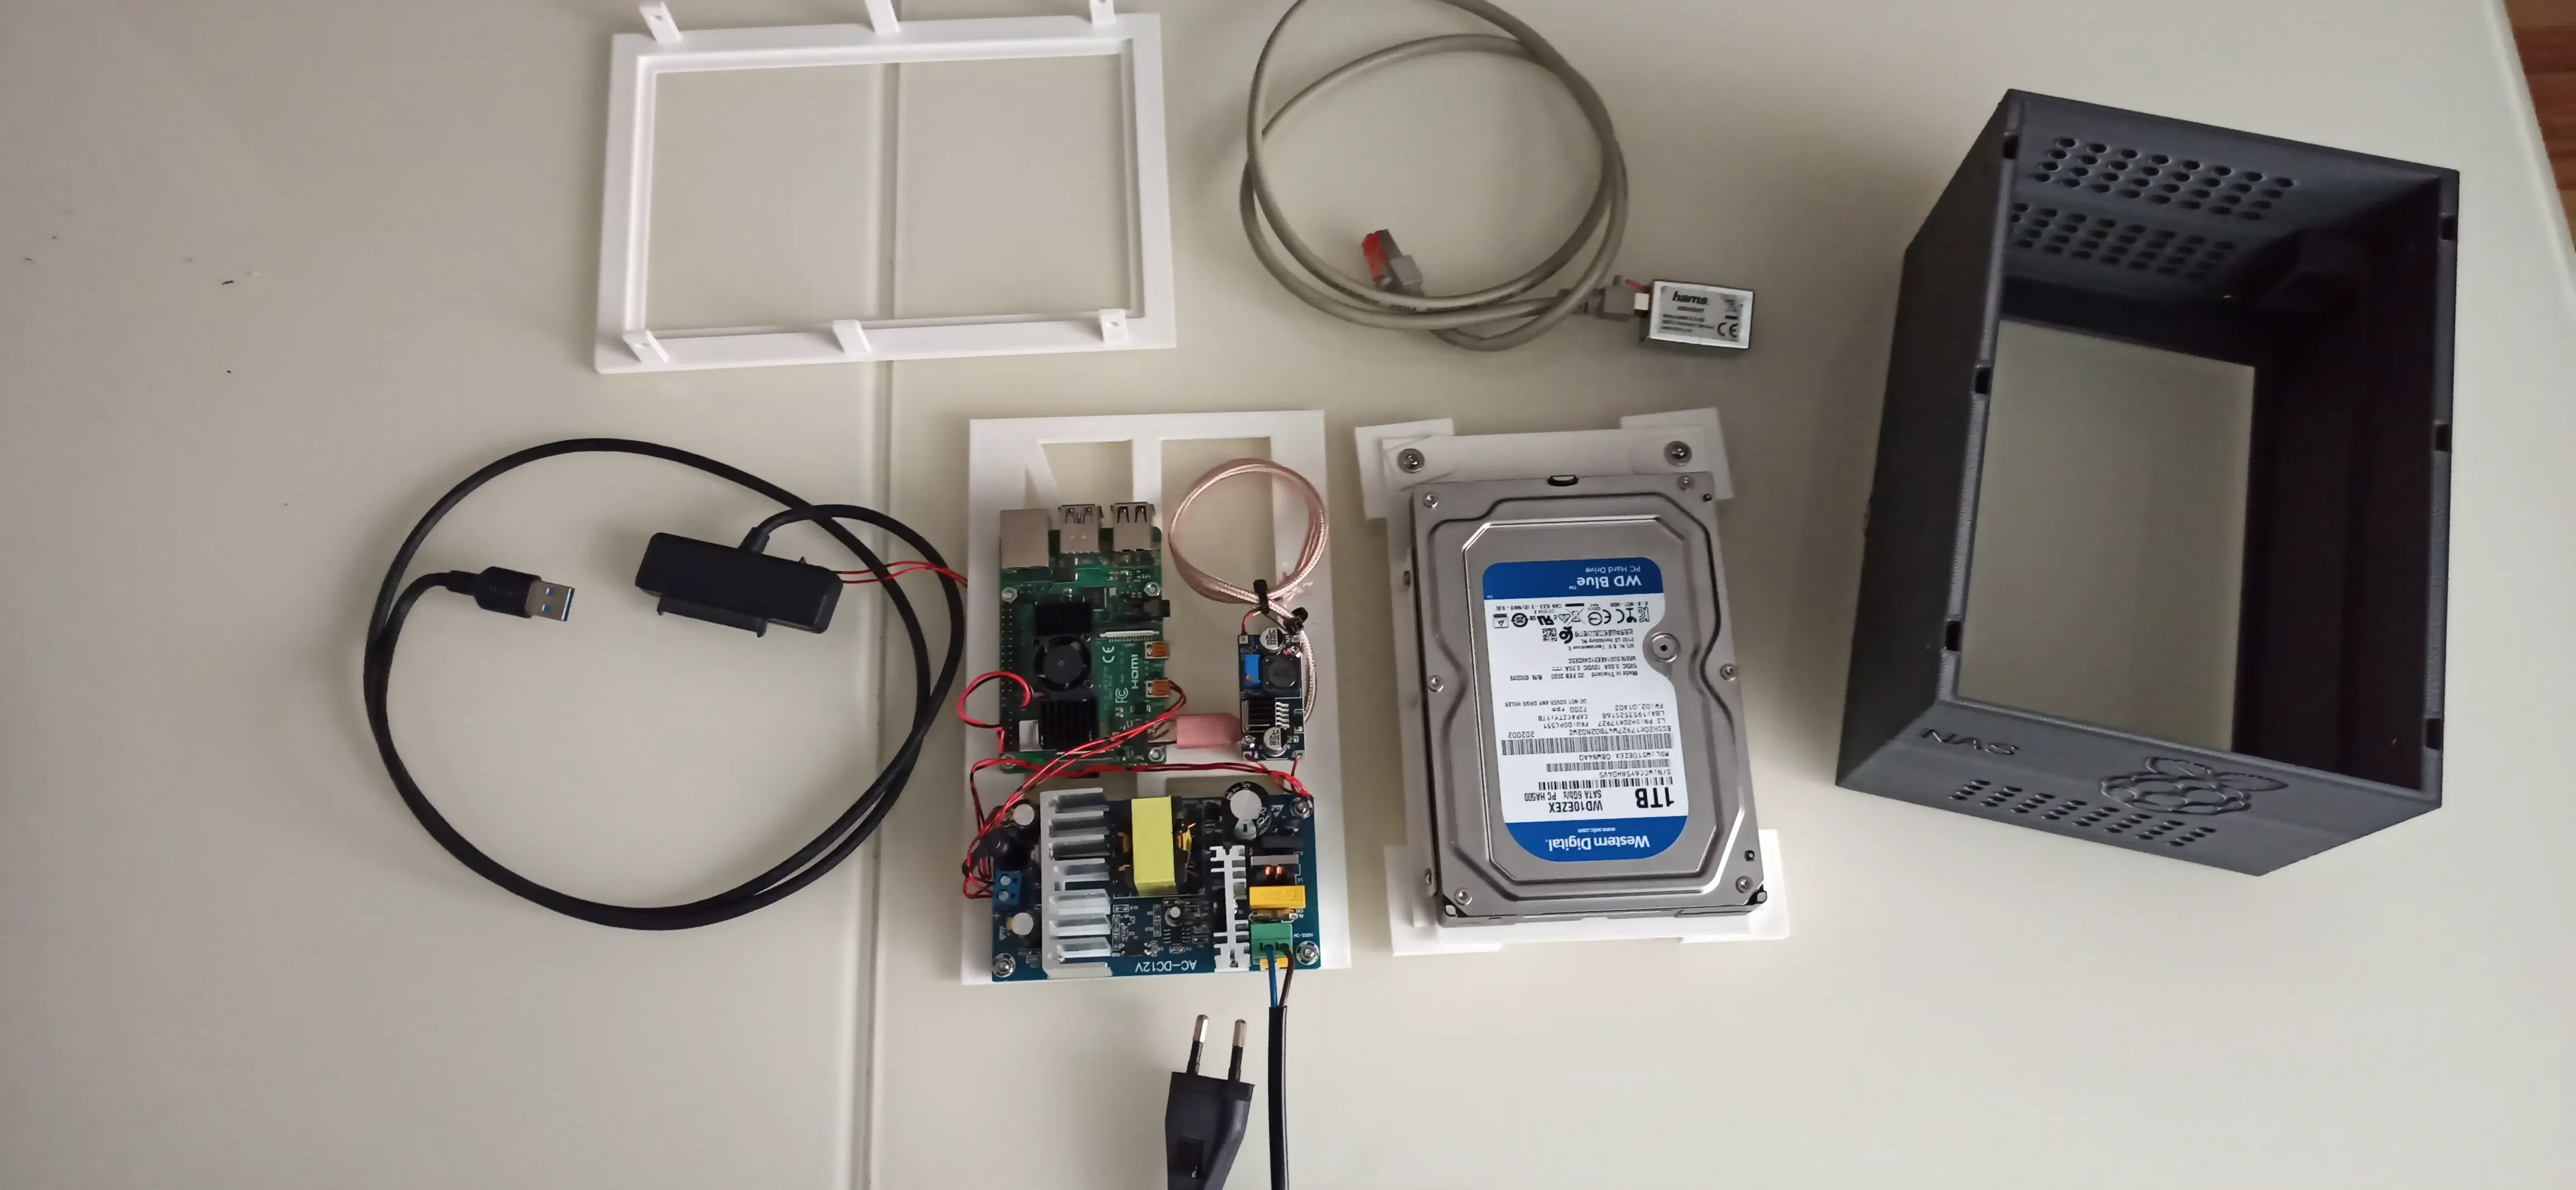 Rasperry Pi 4 + HDD als NAS mit OpenMediaVault by PerryDesig